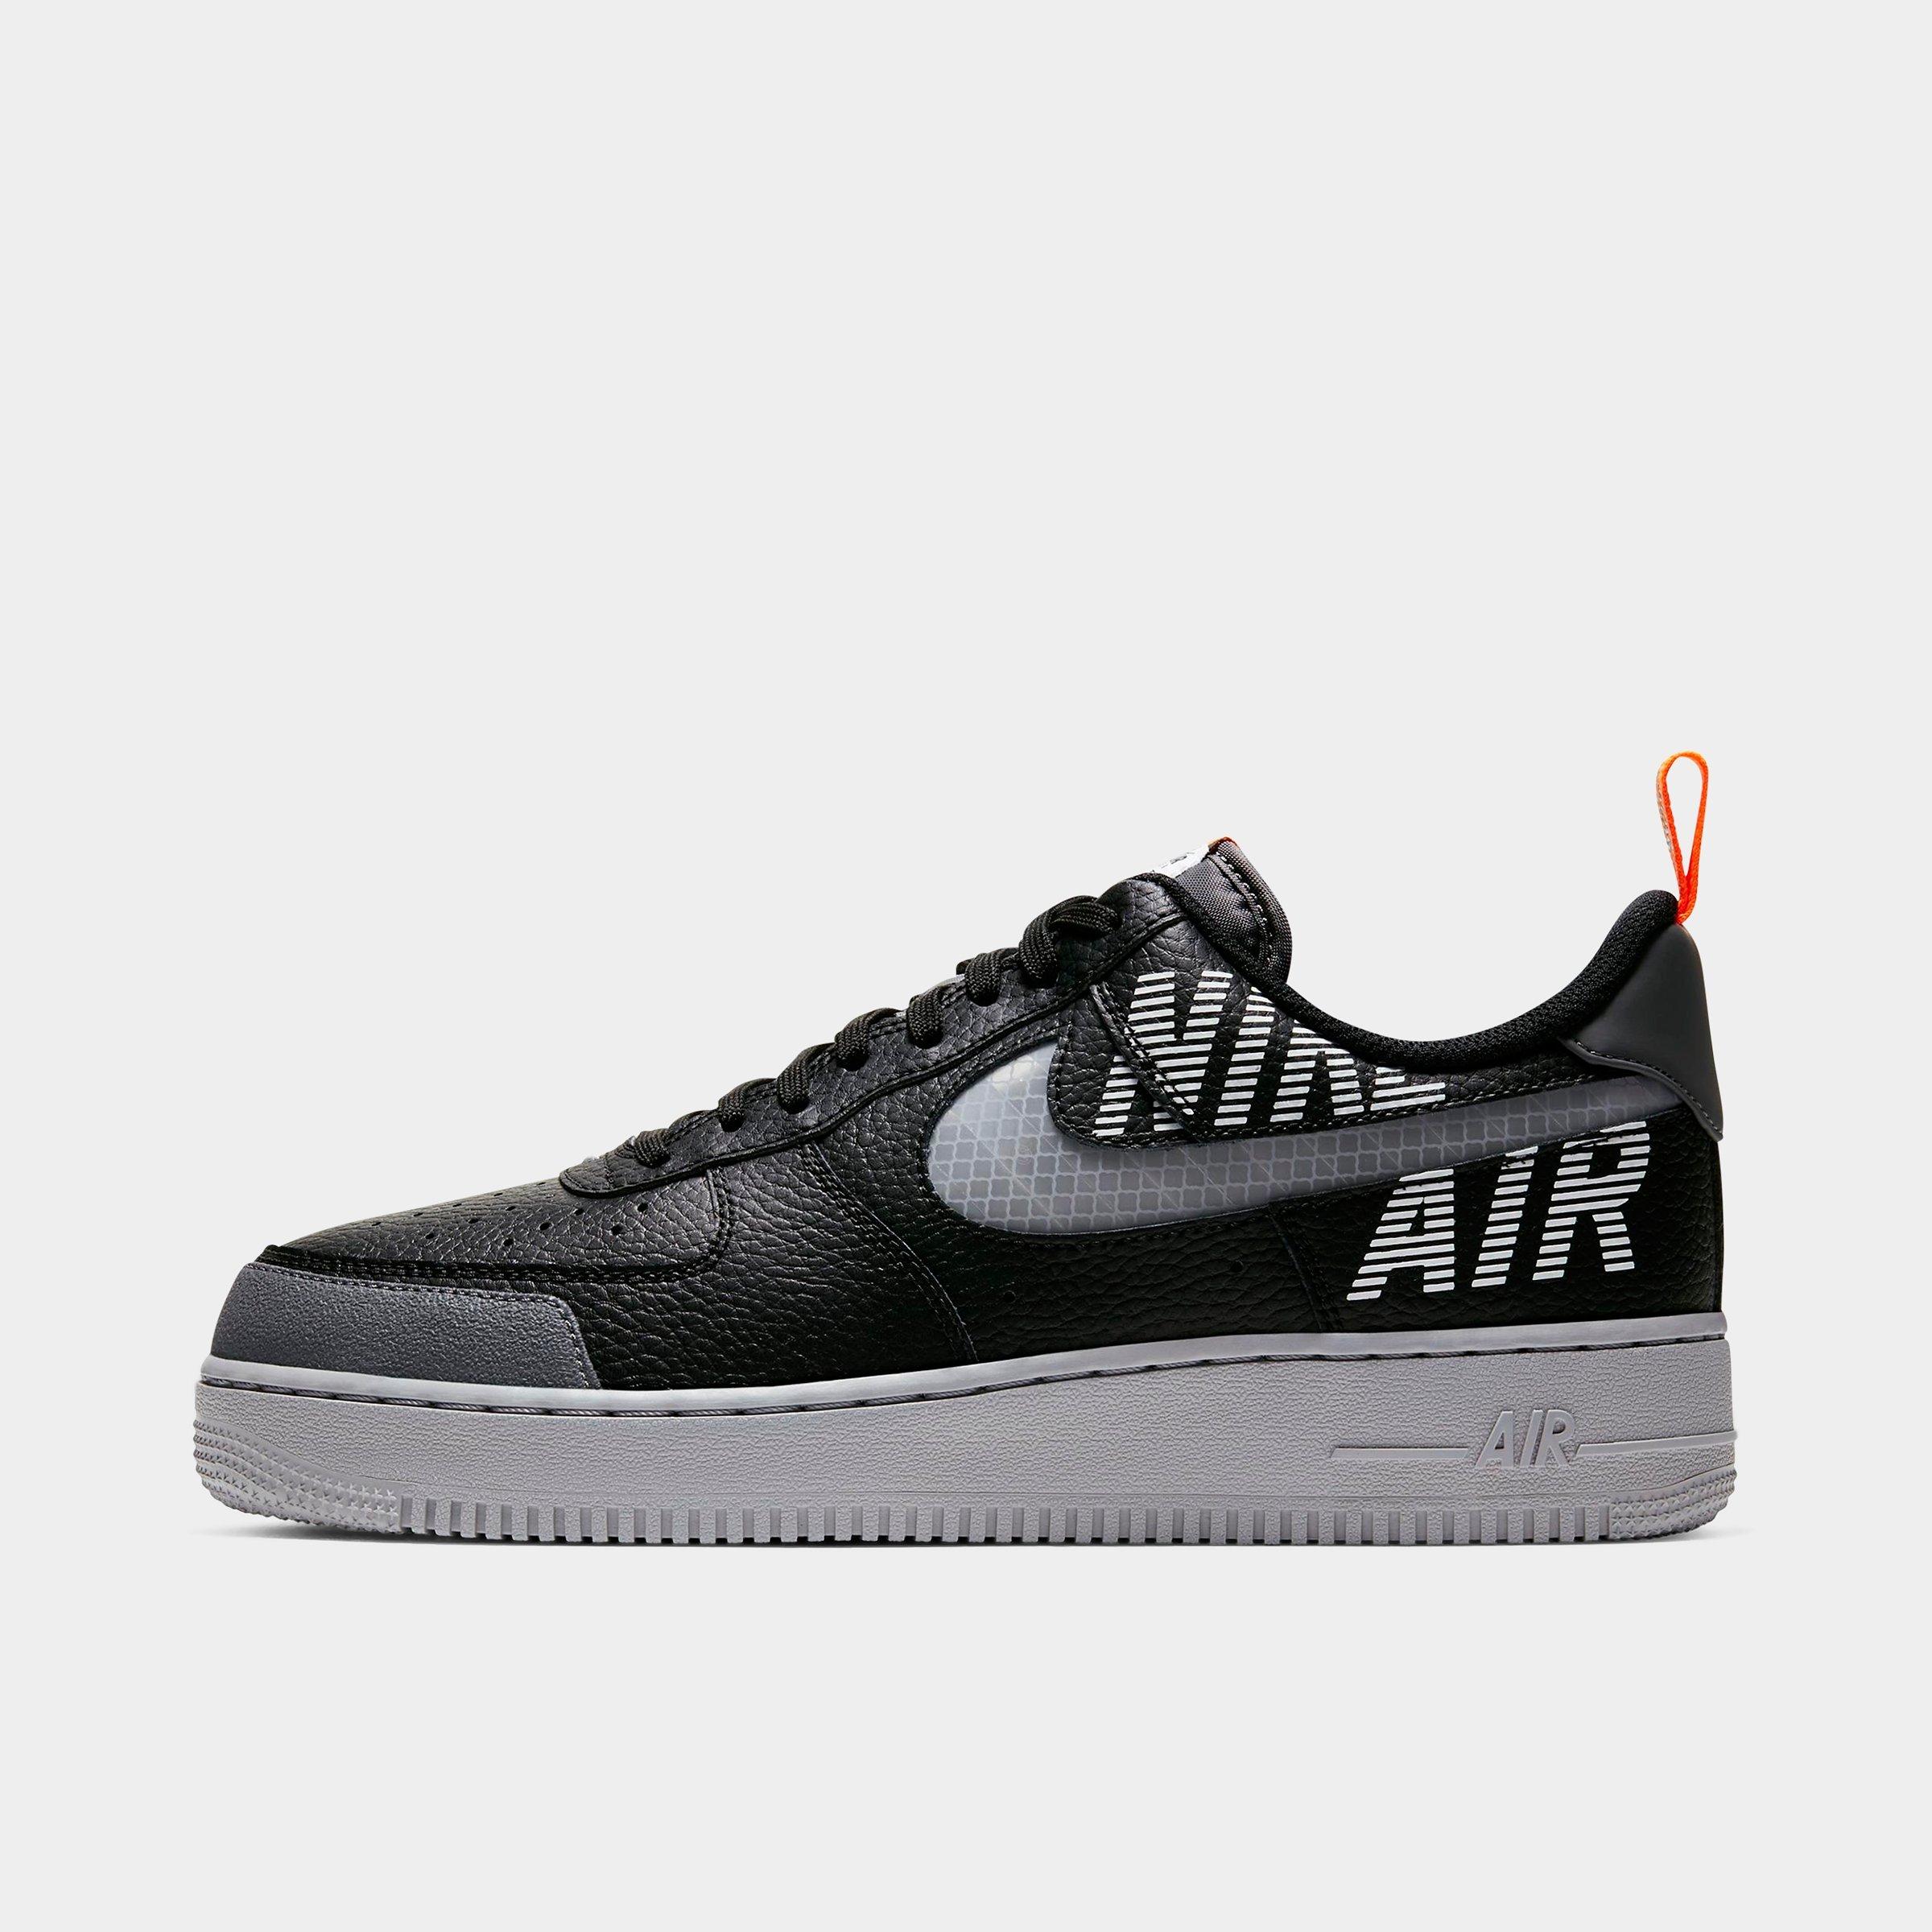 air force one under construction black